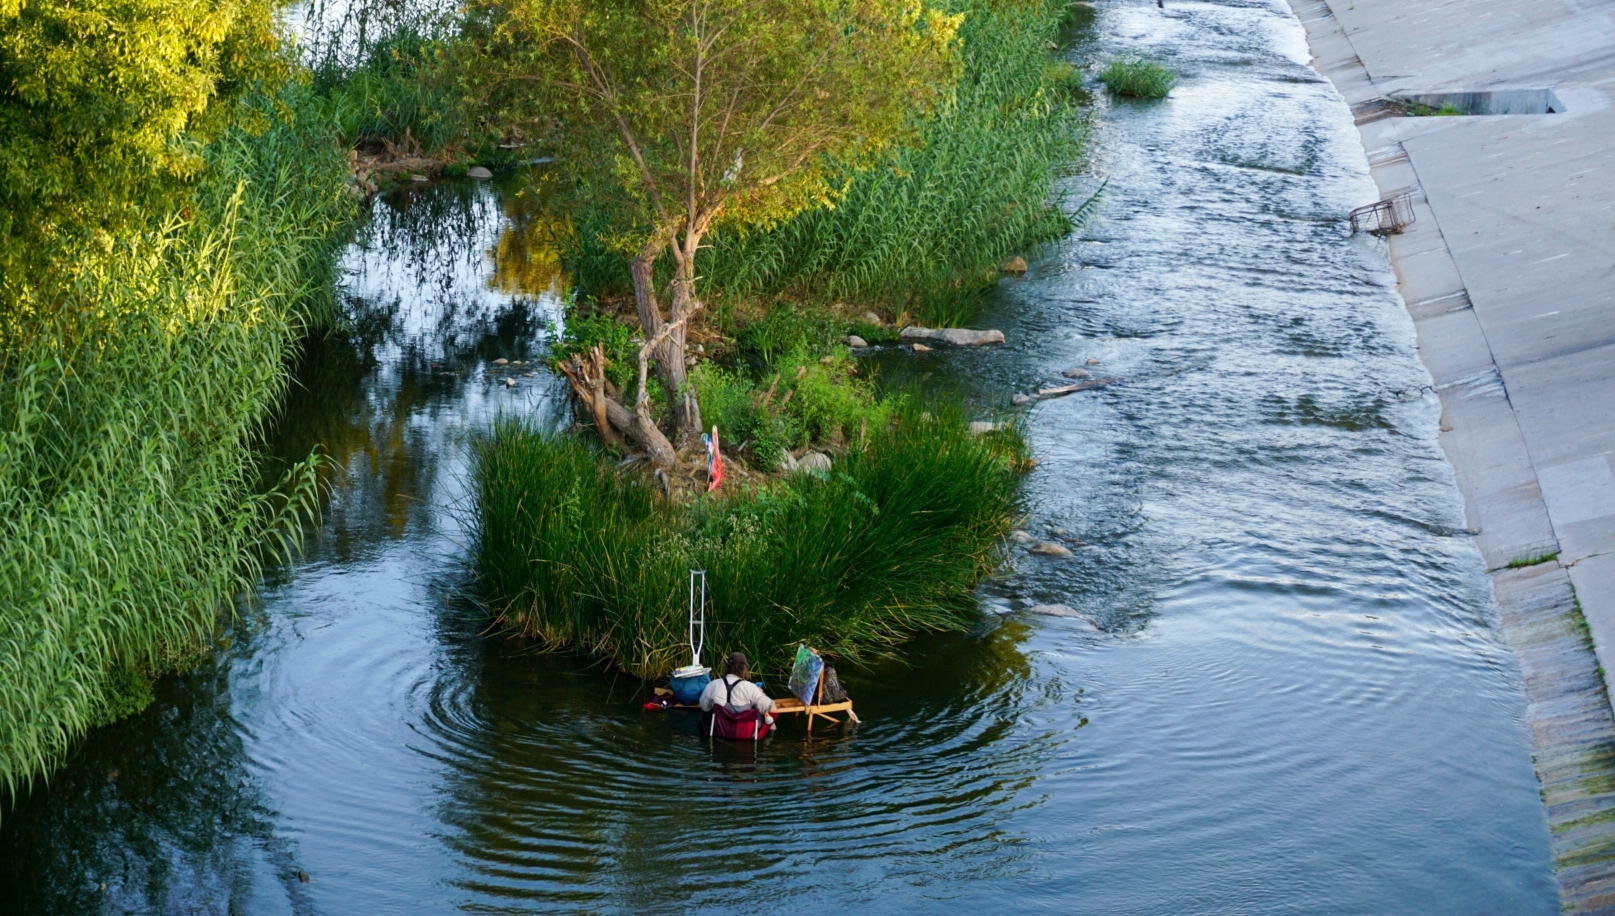 Wells at work in the L.A. River, 2020